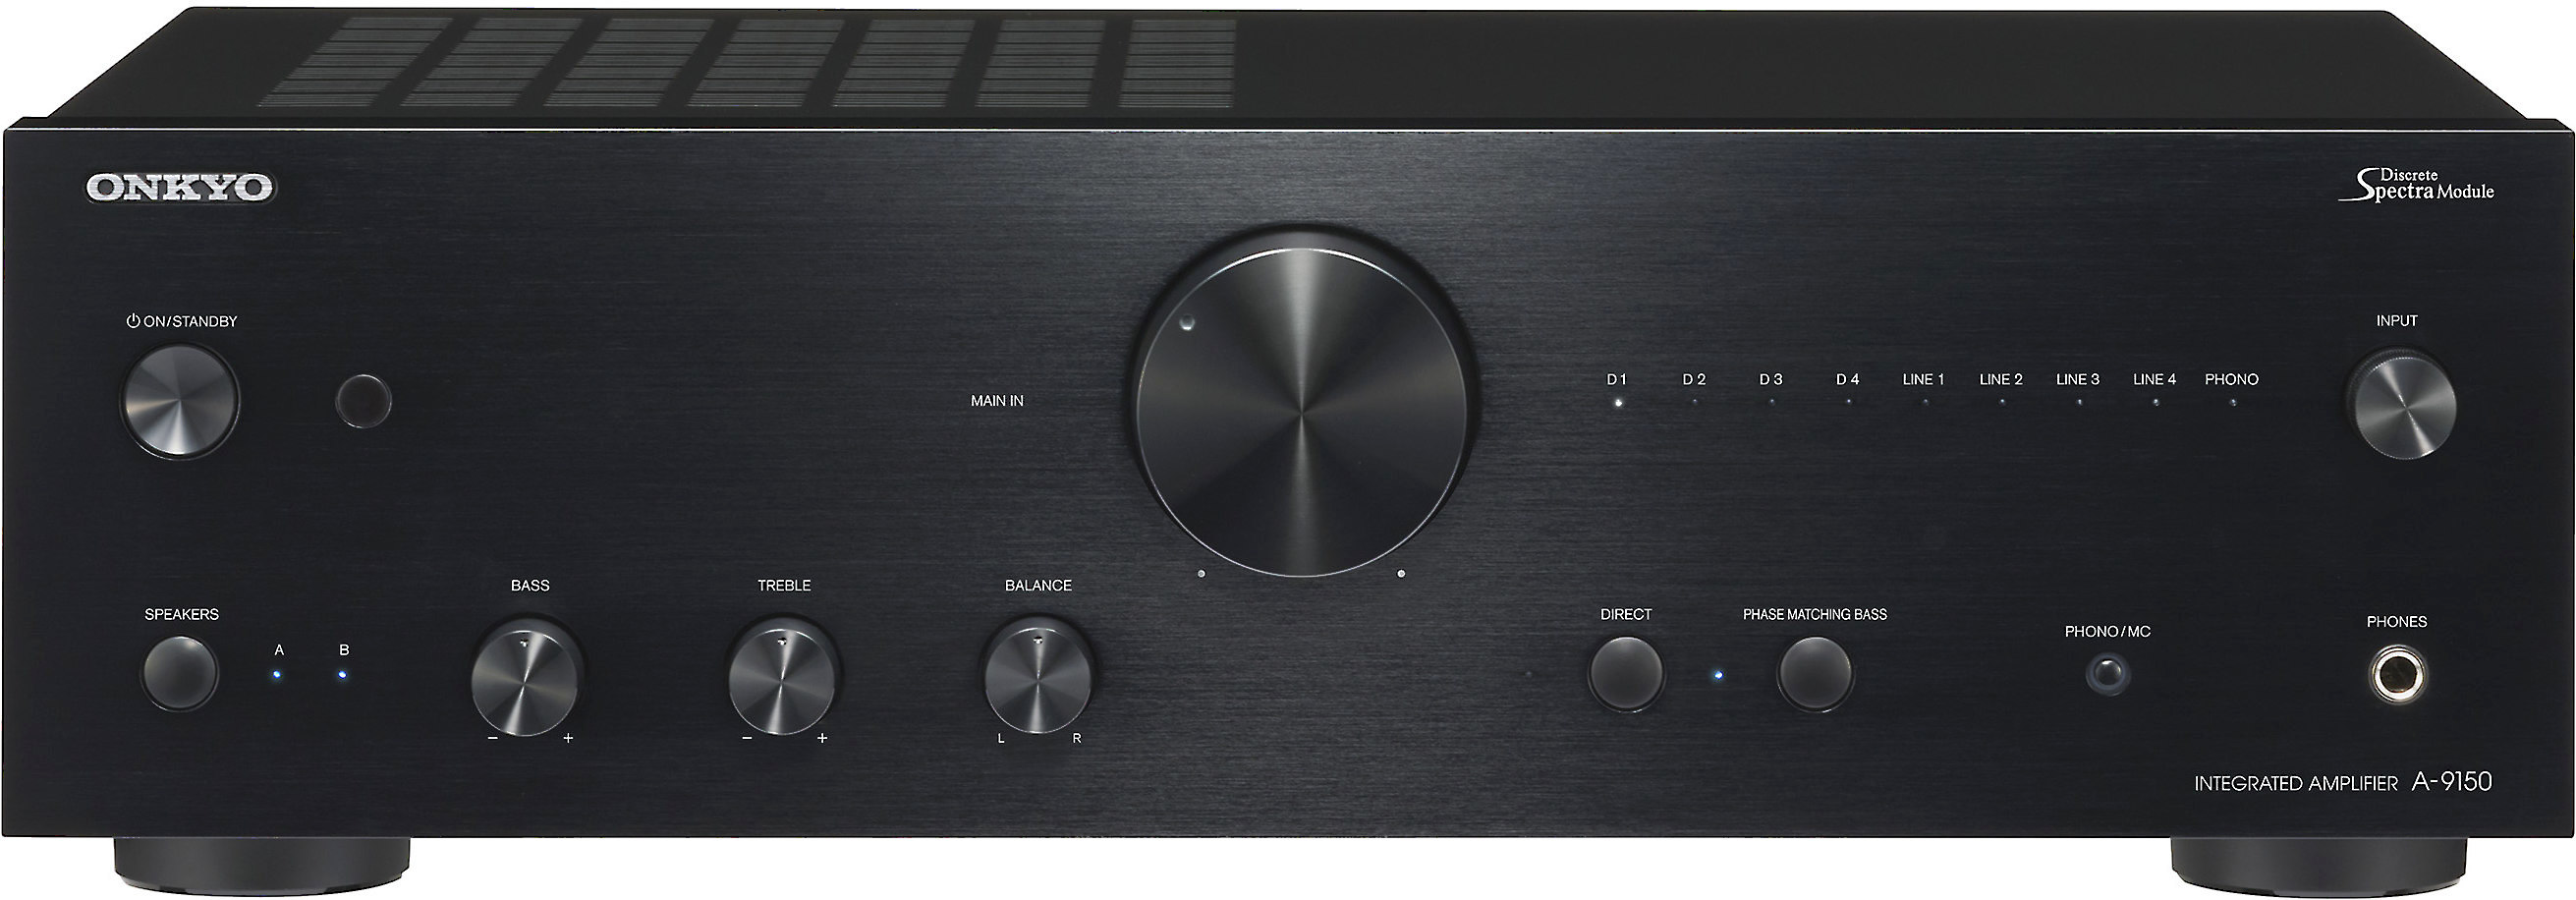 Customer Reviews: Onkyo A-9150 Stereo integrated amplifier